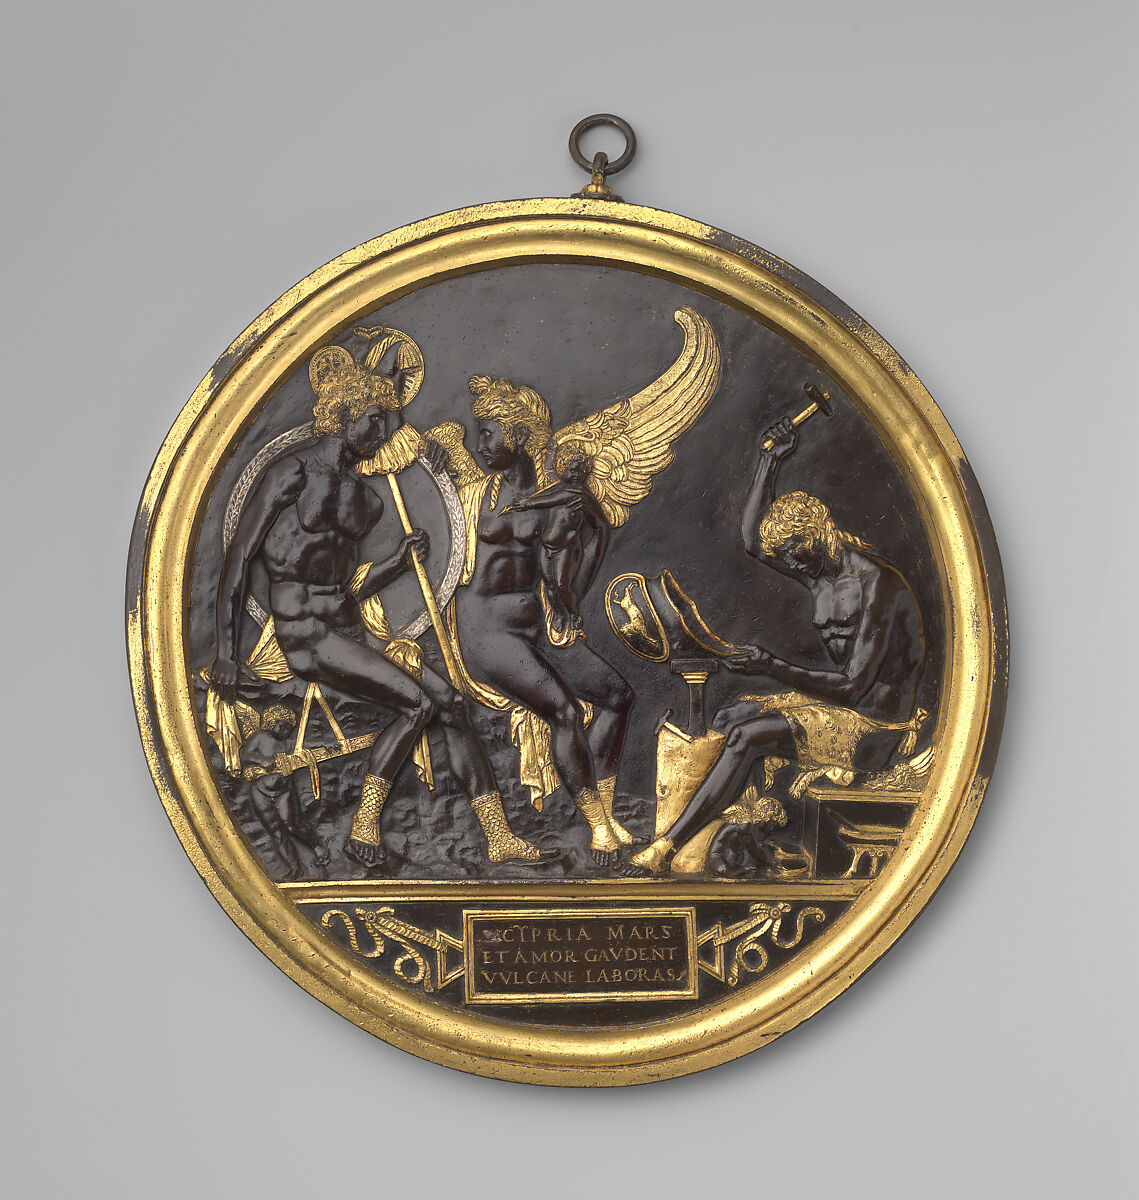 Mars, Venus and Cupid with Vulcan at his forge (the Mantuan Roundel), attributed to Gian Marco Cavalli (Italian, ca. 1454–after 1508, activity documented 1475–1508), Parcel-gilt bronze with silver inlay, integrally cast gilt frame with suspension loop., Italian, Mantua 